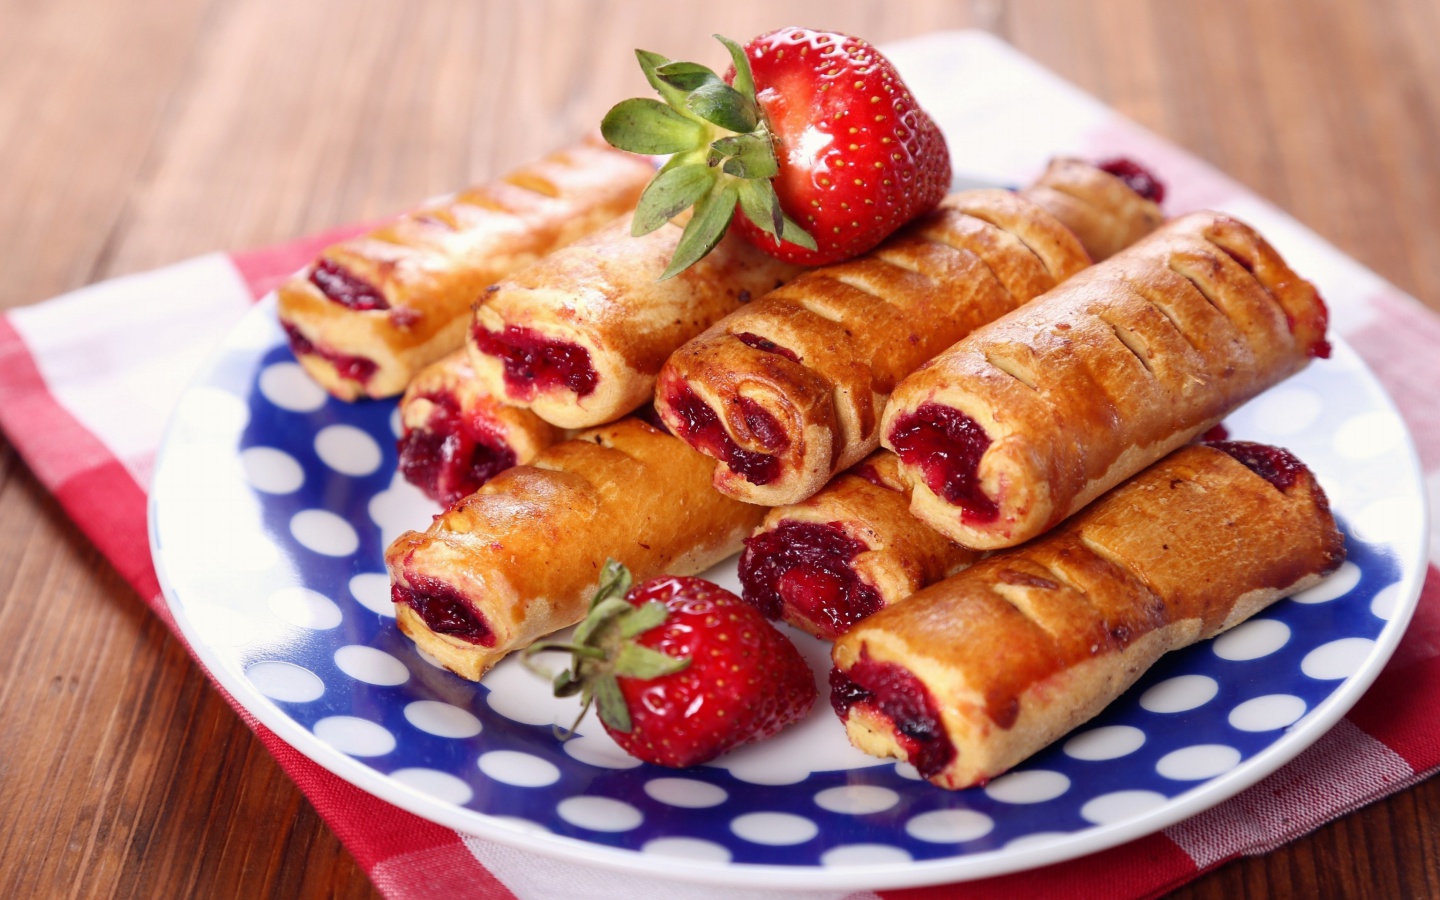 Pastry with Jam wallpaper 1440x900